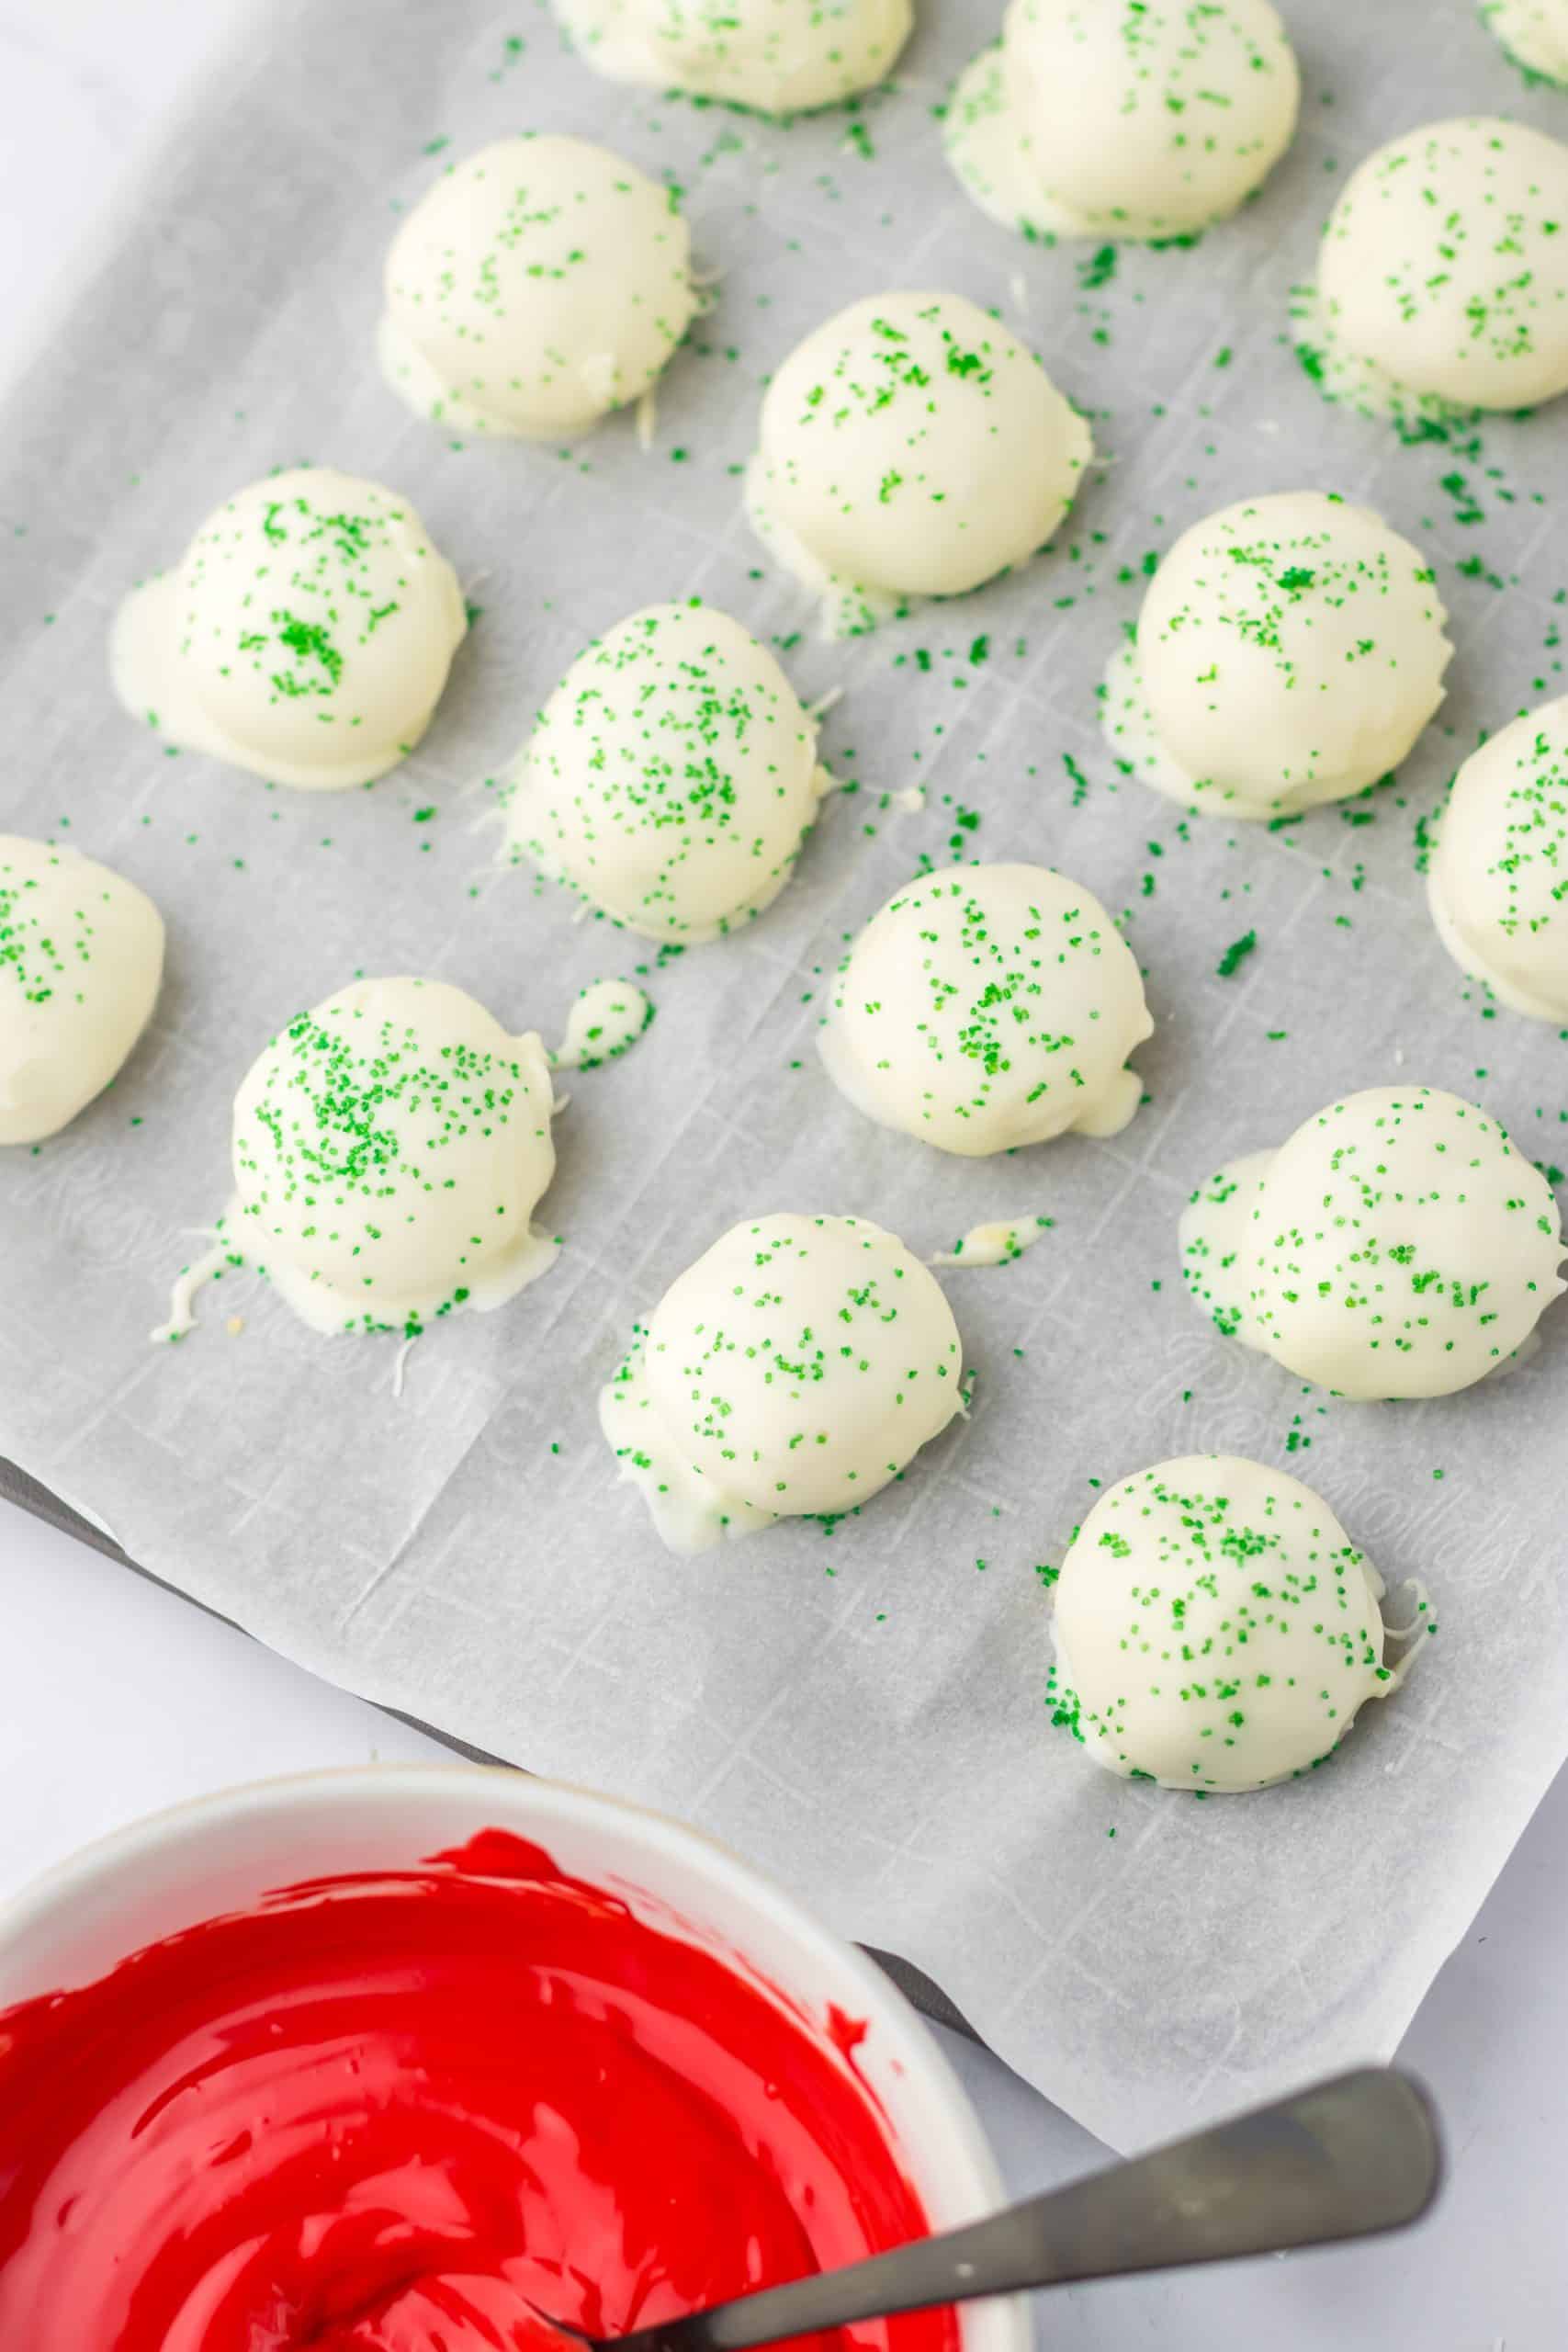 white chocolate covered cake balls with green sprinkles on top